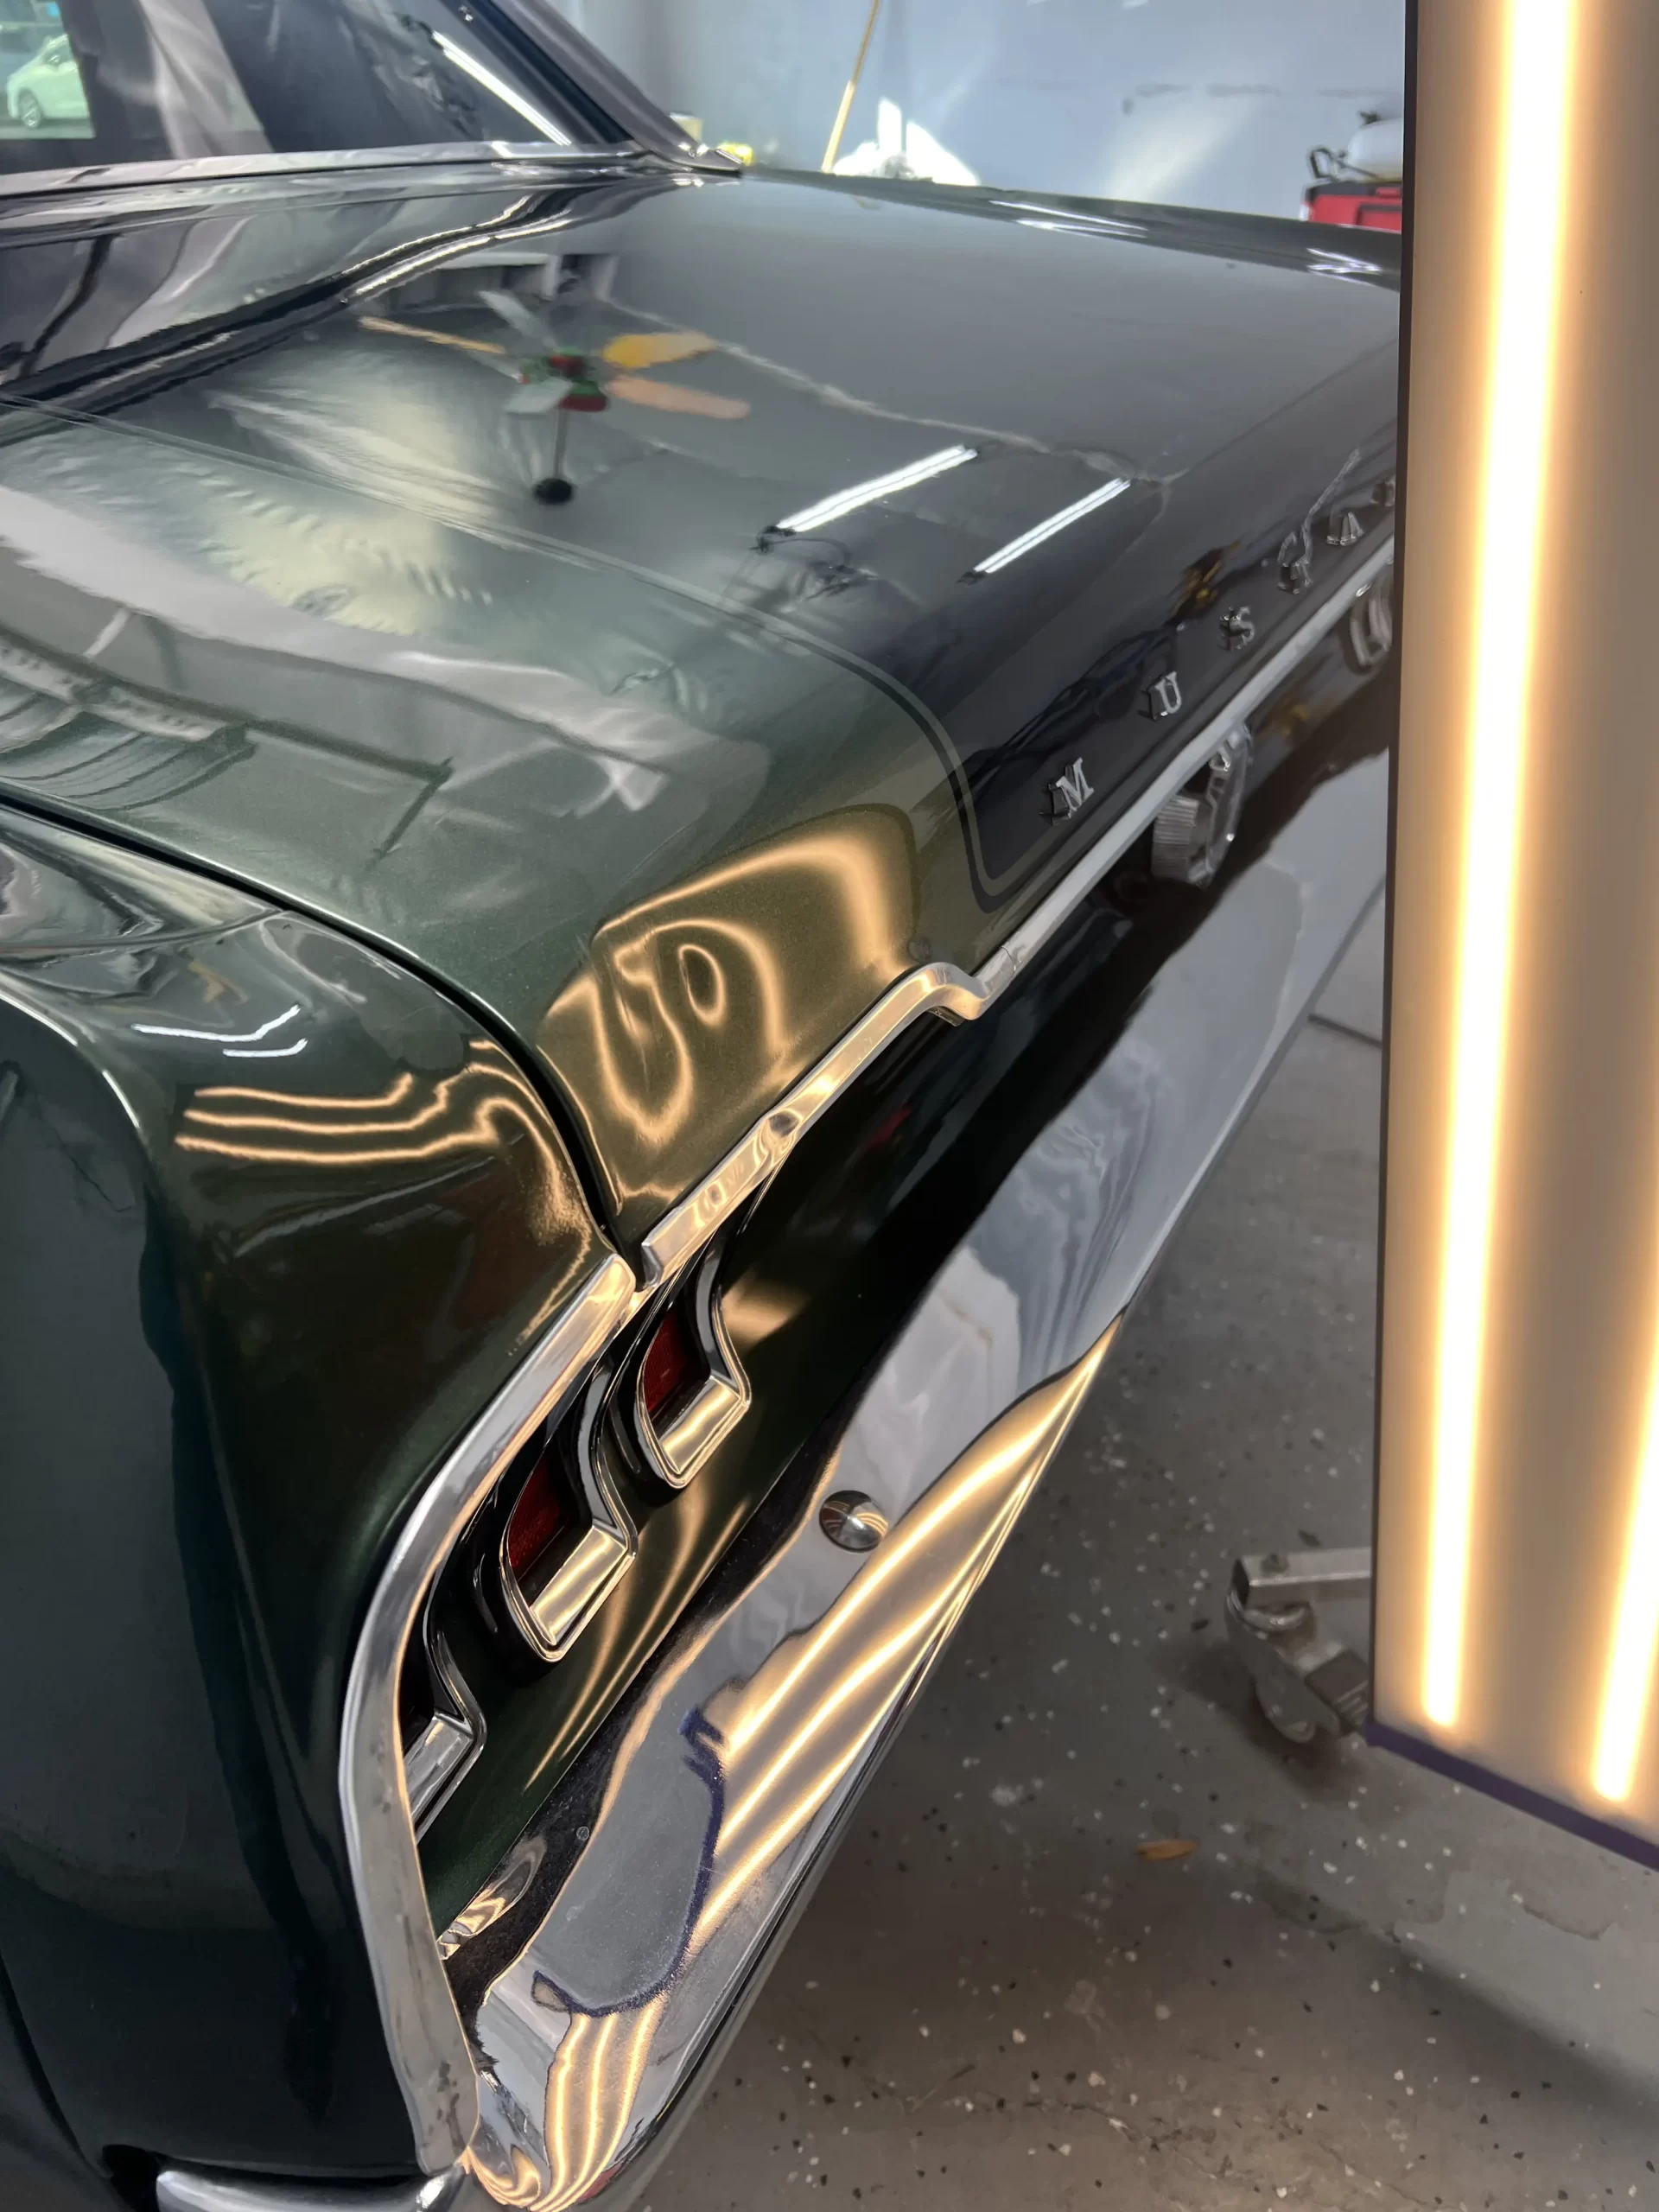 The dented back portion of a Mustang is being lit up for inspection prior to repairs.